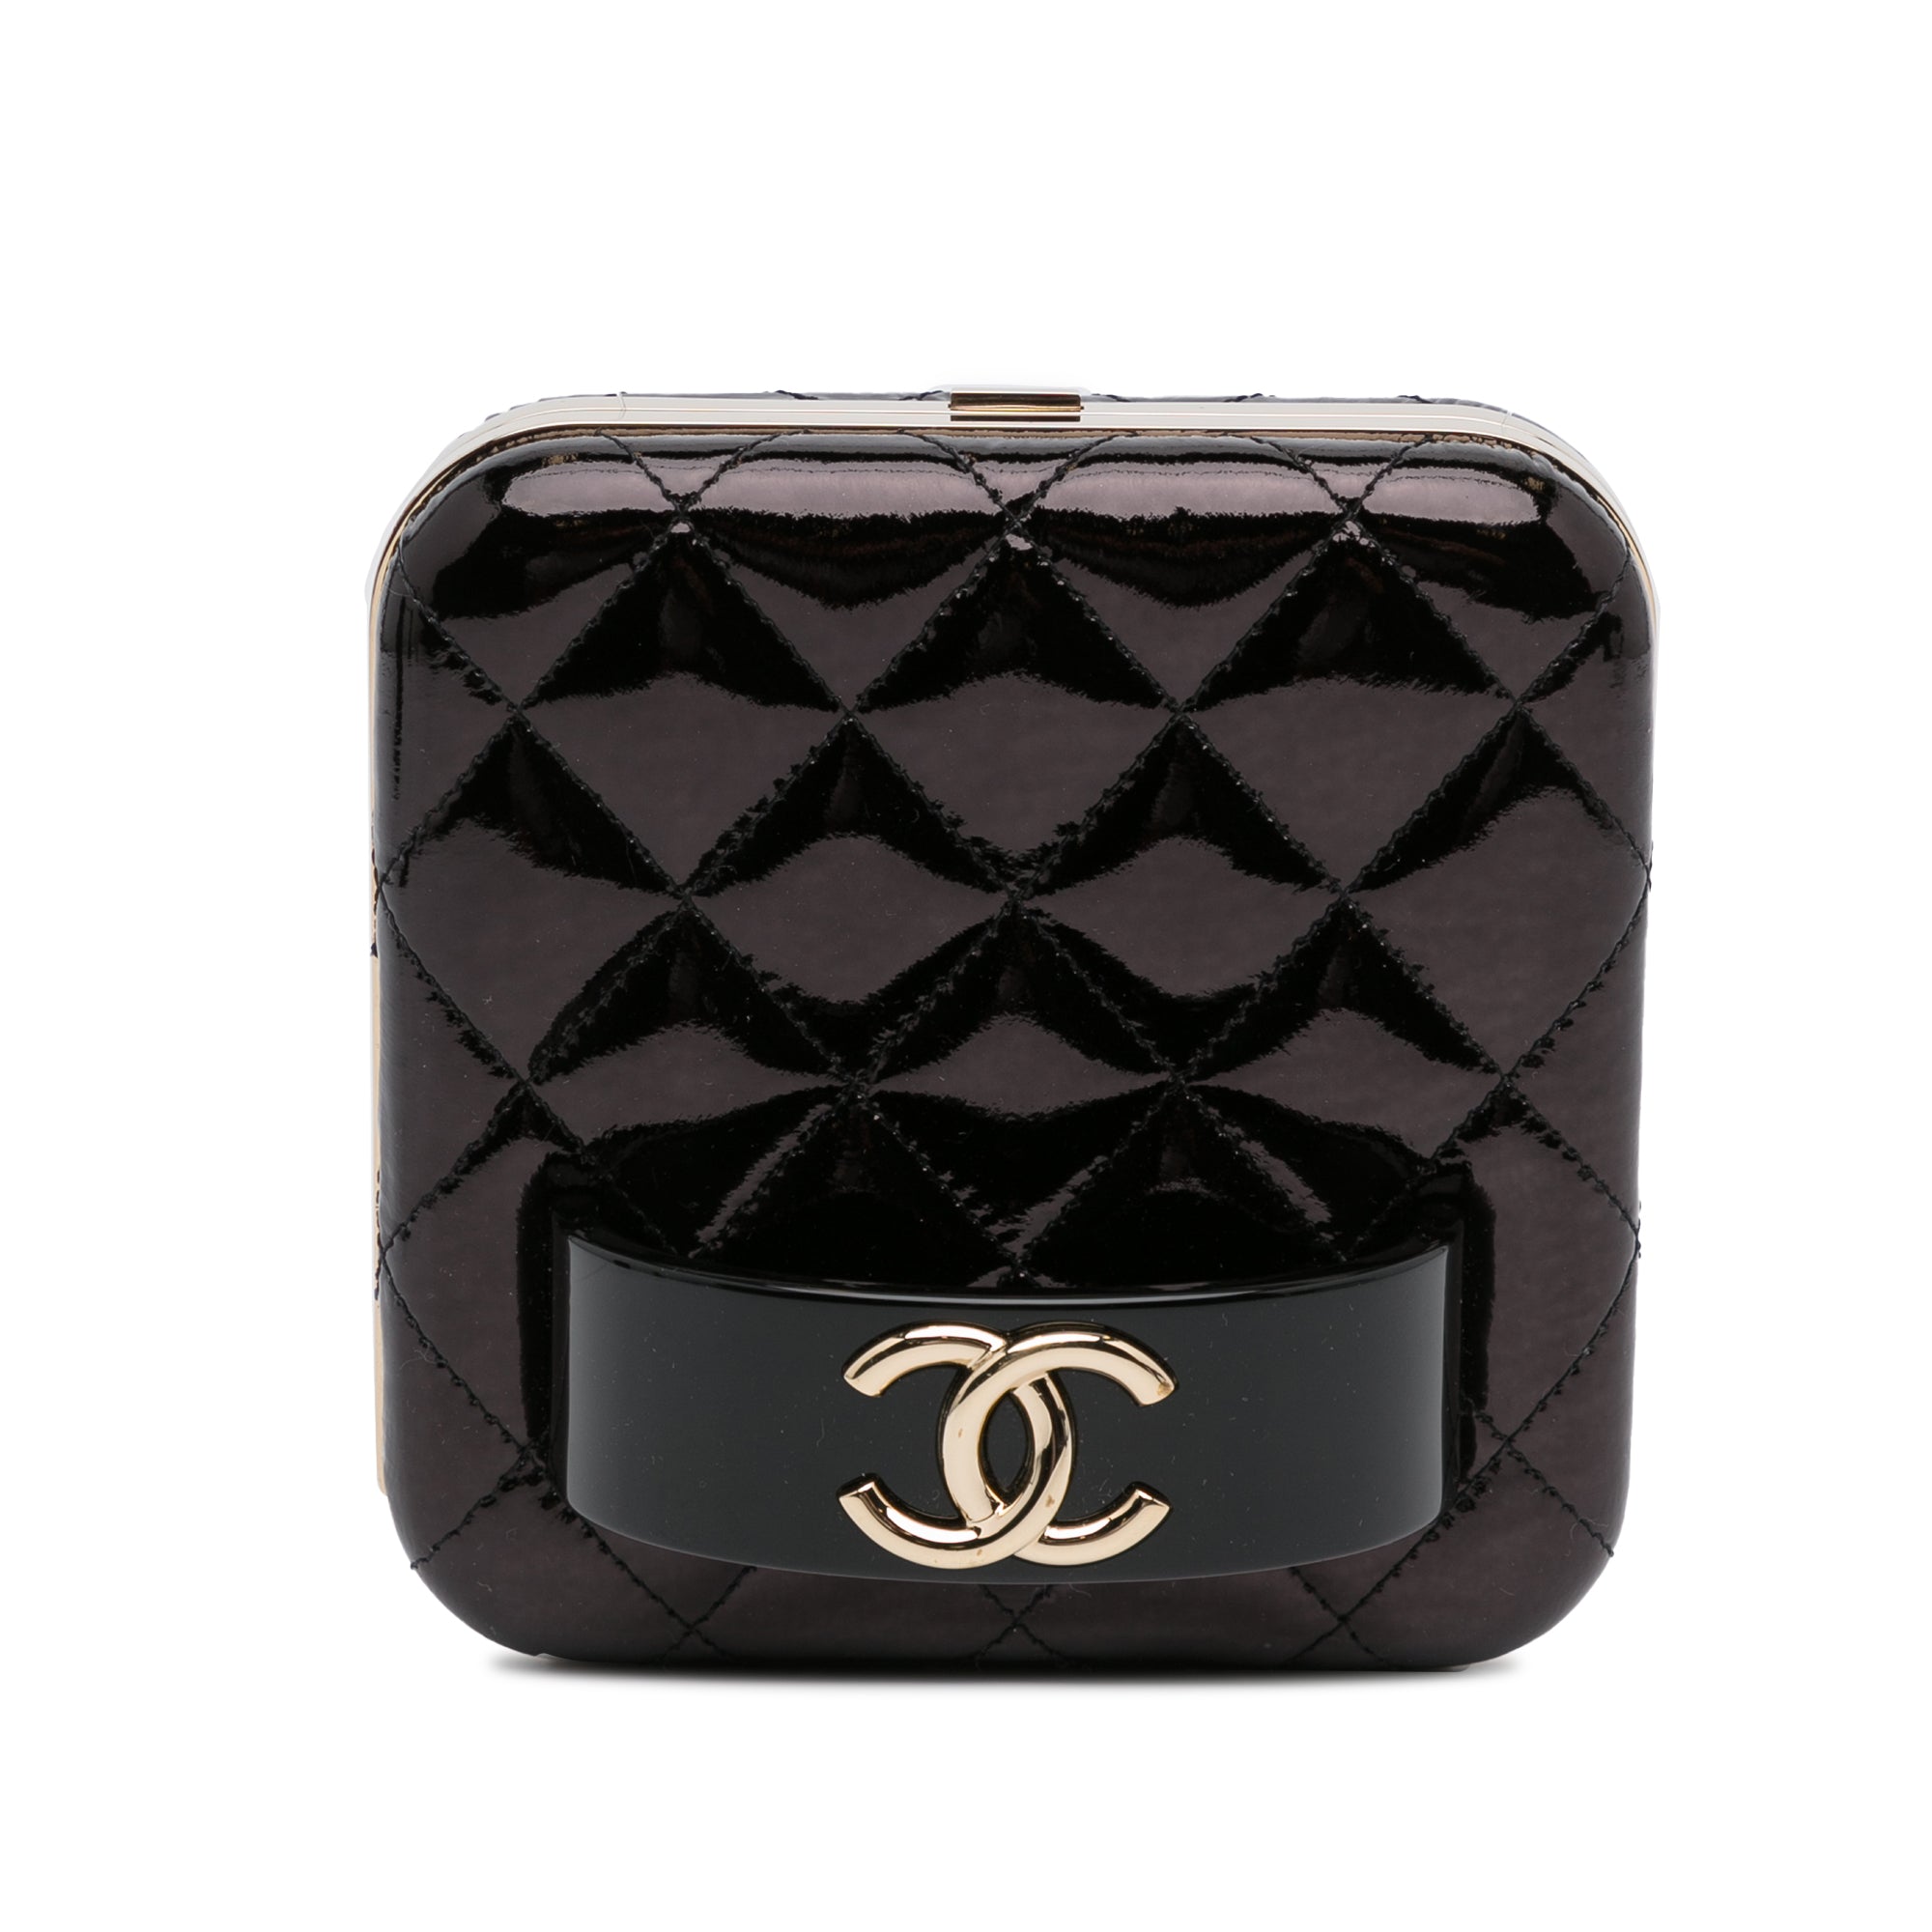 CHANEL CC Black Patent Leather 2way Vanity Case Cosmetic Bag